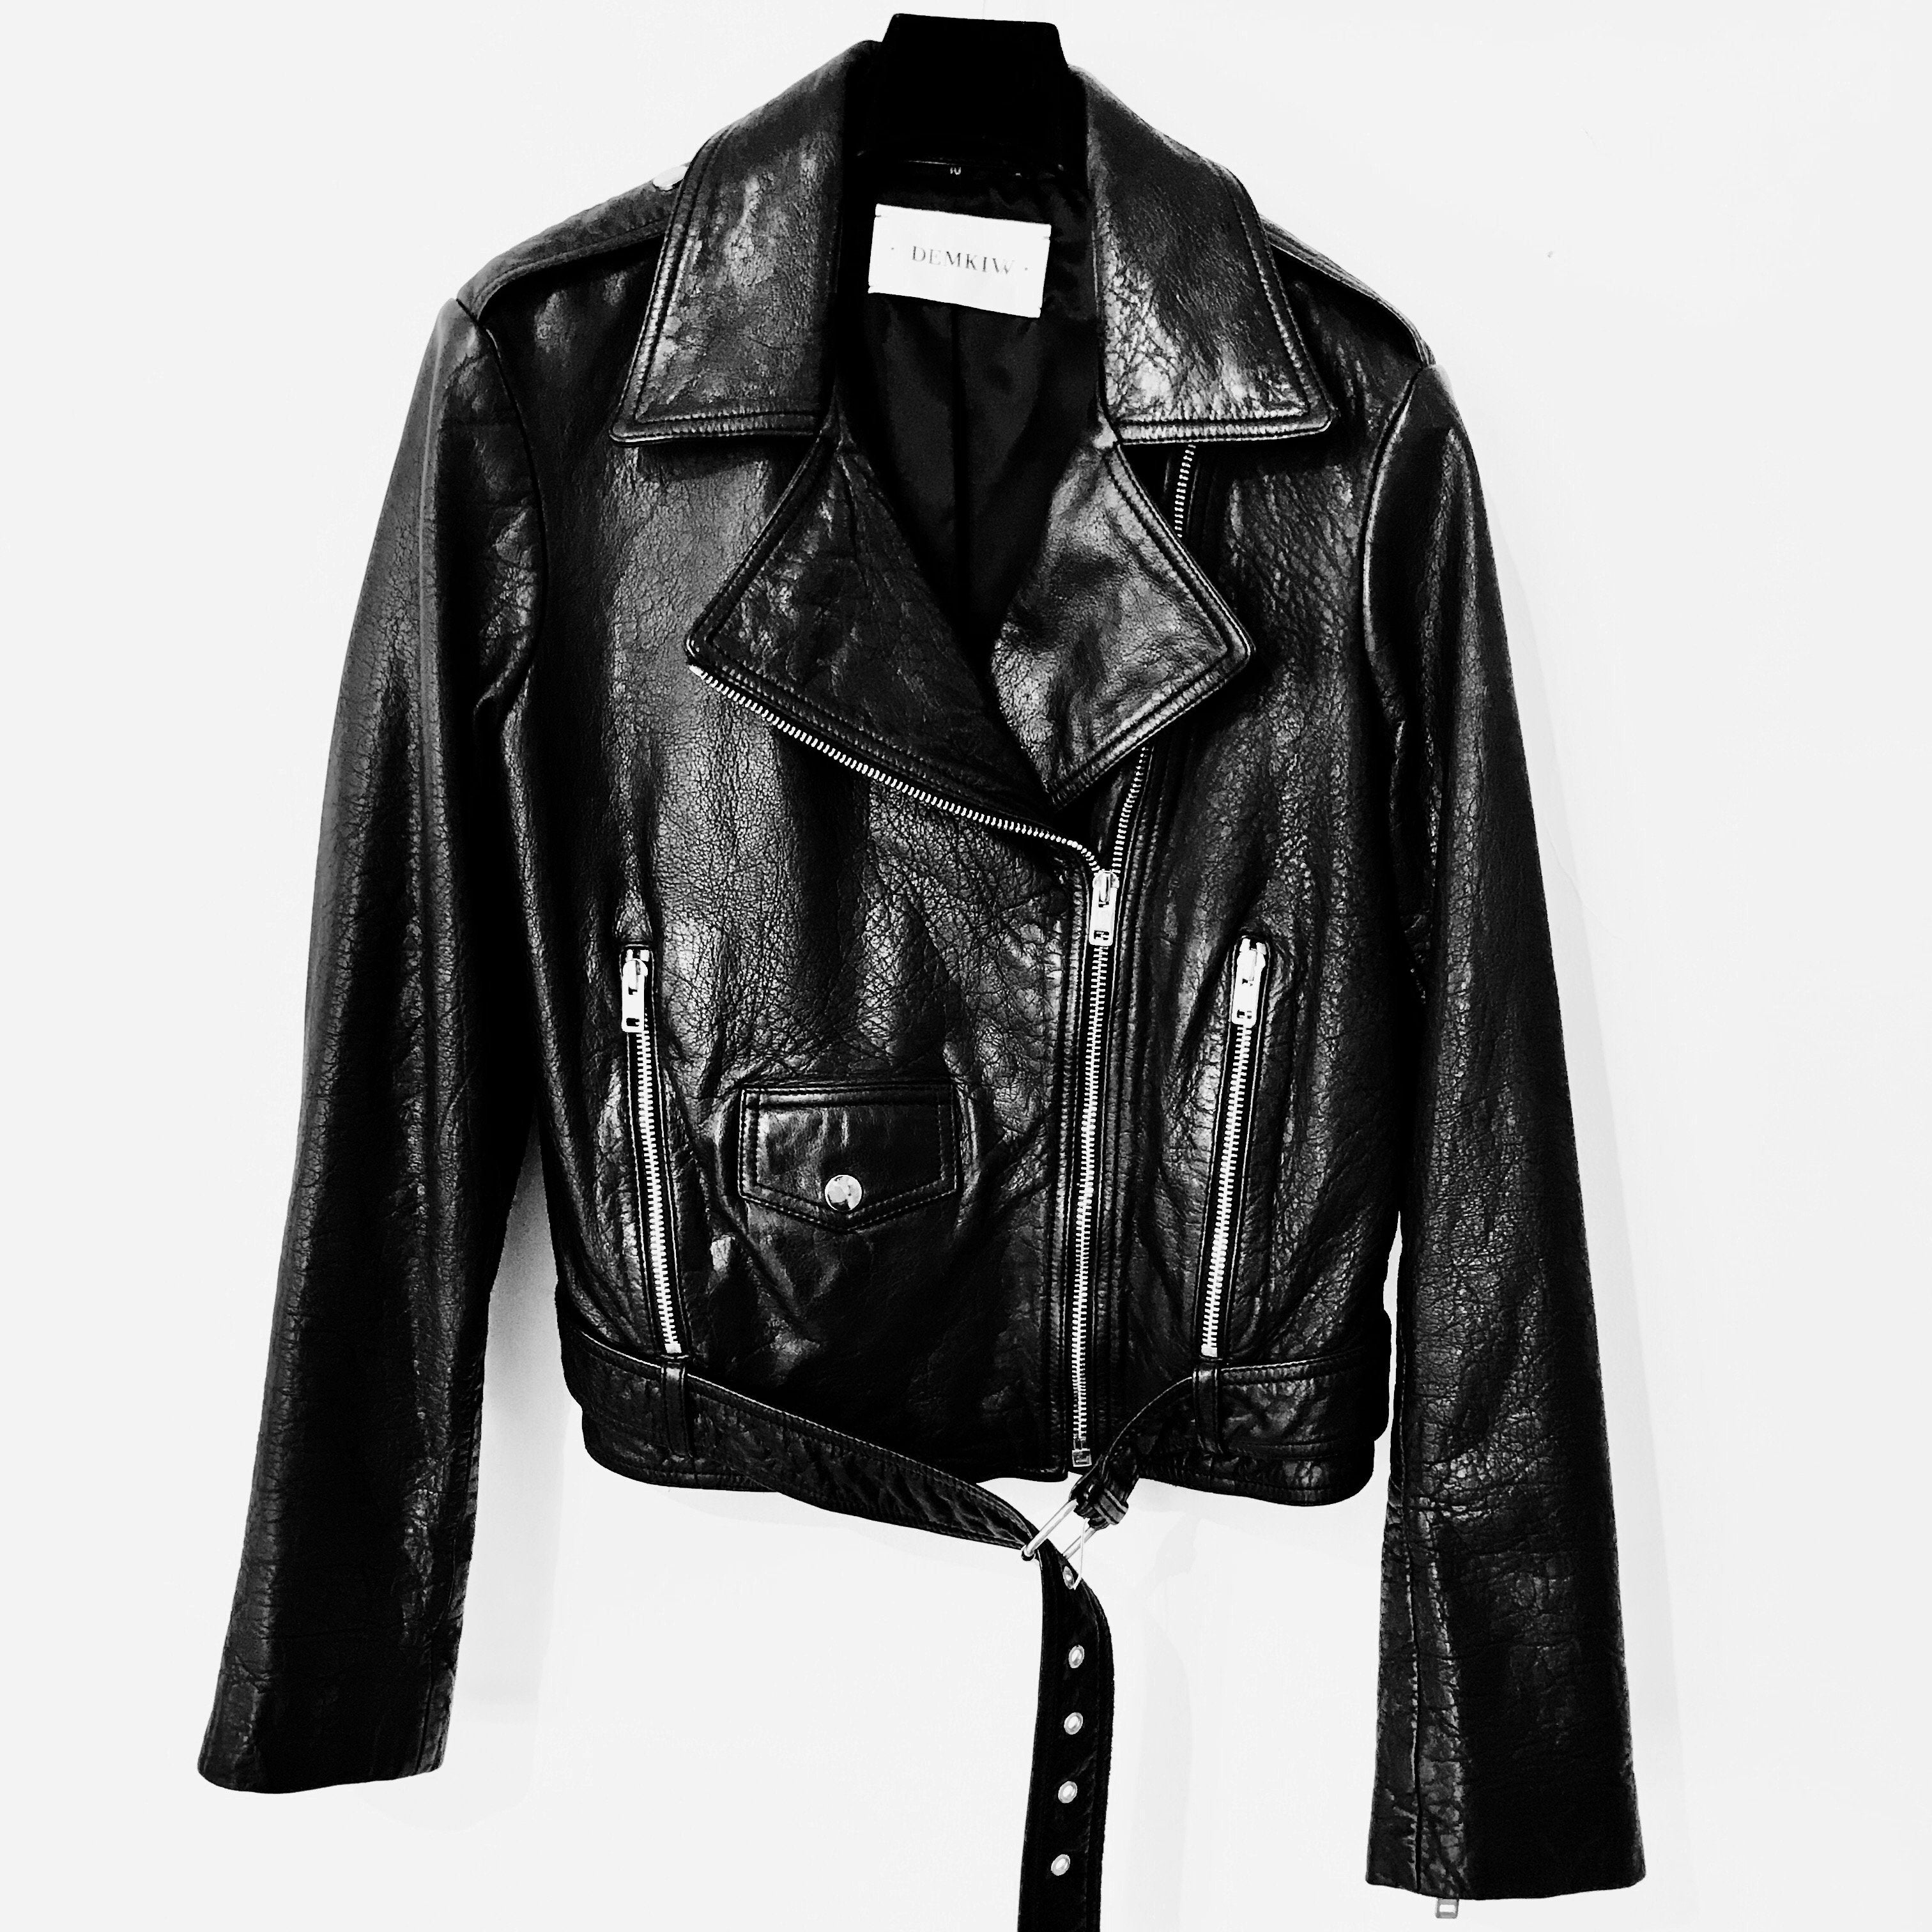 What's New | Latest Leather Jackets You Can Order! - Leather Skin Shop